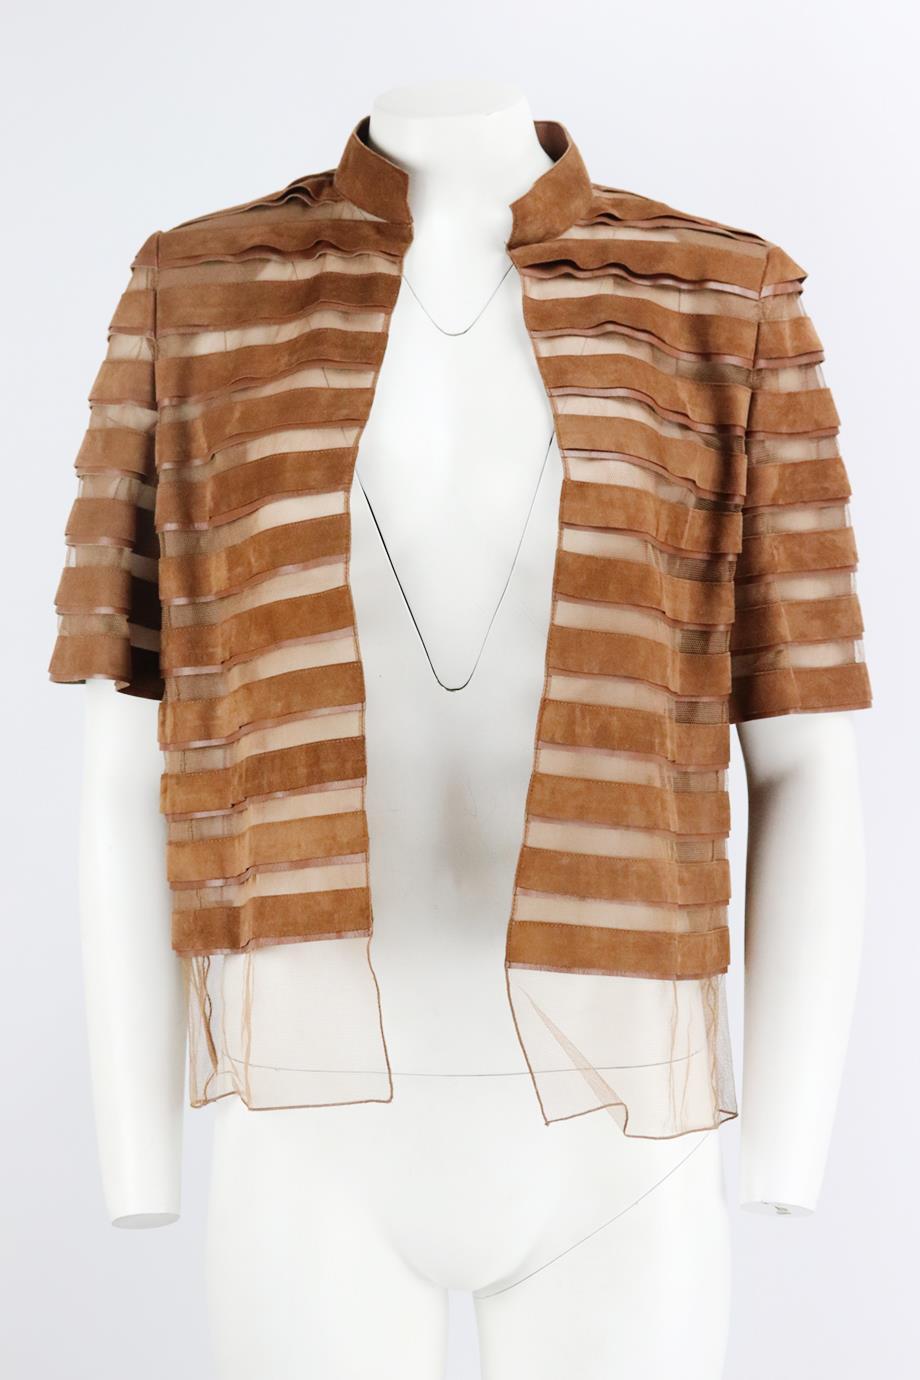 Akris suede and mesh jacket. Brown. Short sleeve, crewneck. Slips on. 100% Suede; lining: 100% silk. Size: US 10 (UK 14, FR 42, IT 46). Bust: 40 in. Waist: 40 in. Hips: 42 in. Length: 23 in
